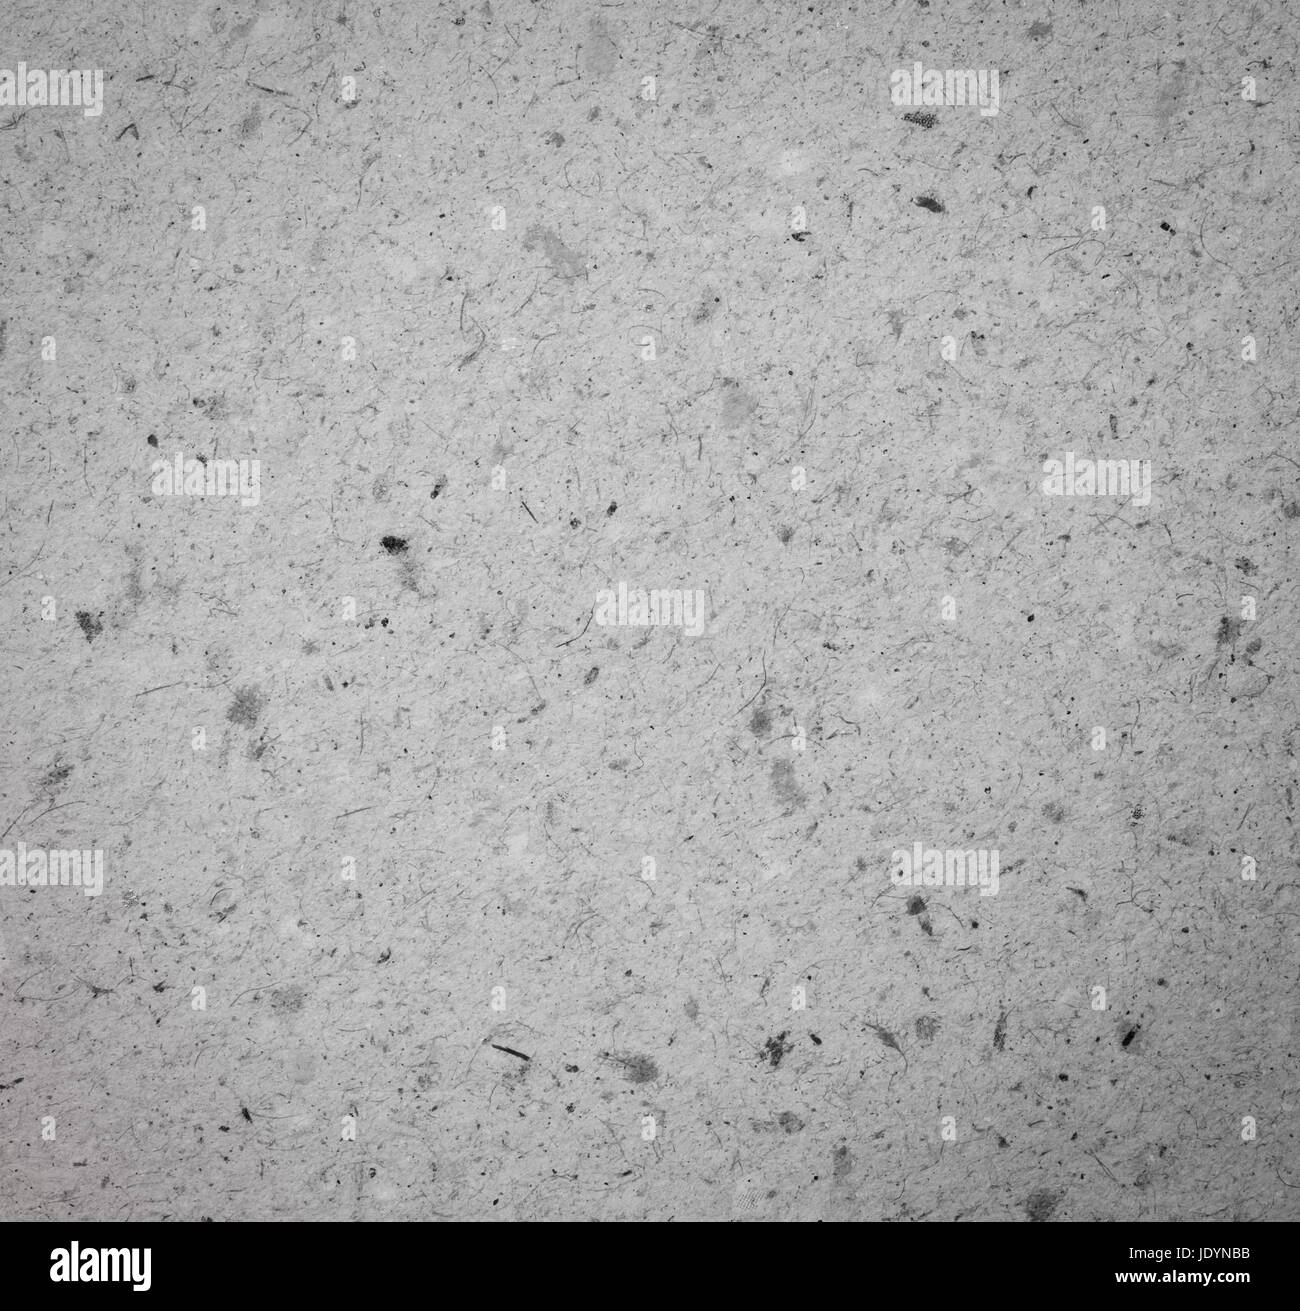 Recycled paper texture background in black and white color Stock Photo ...